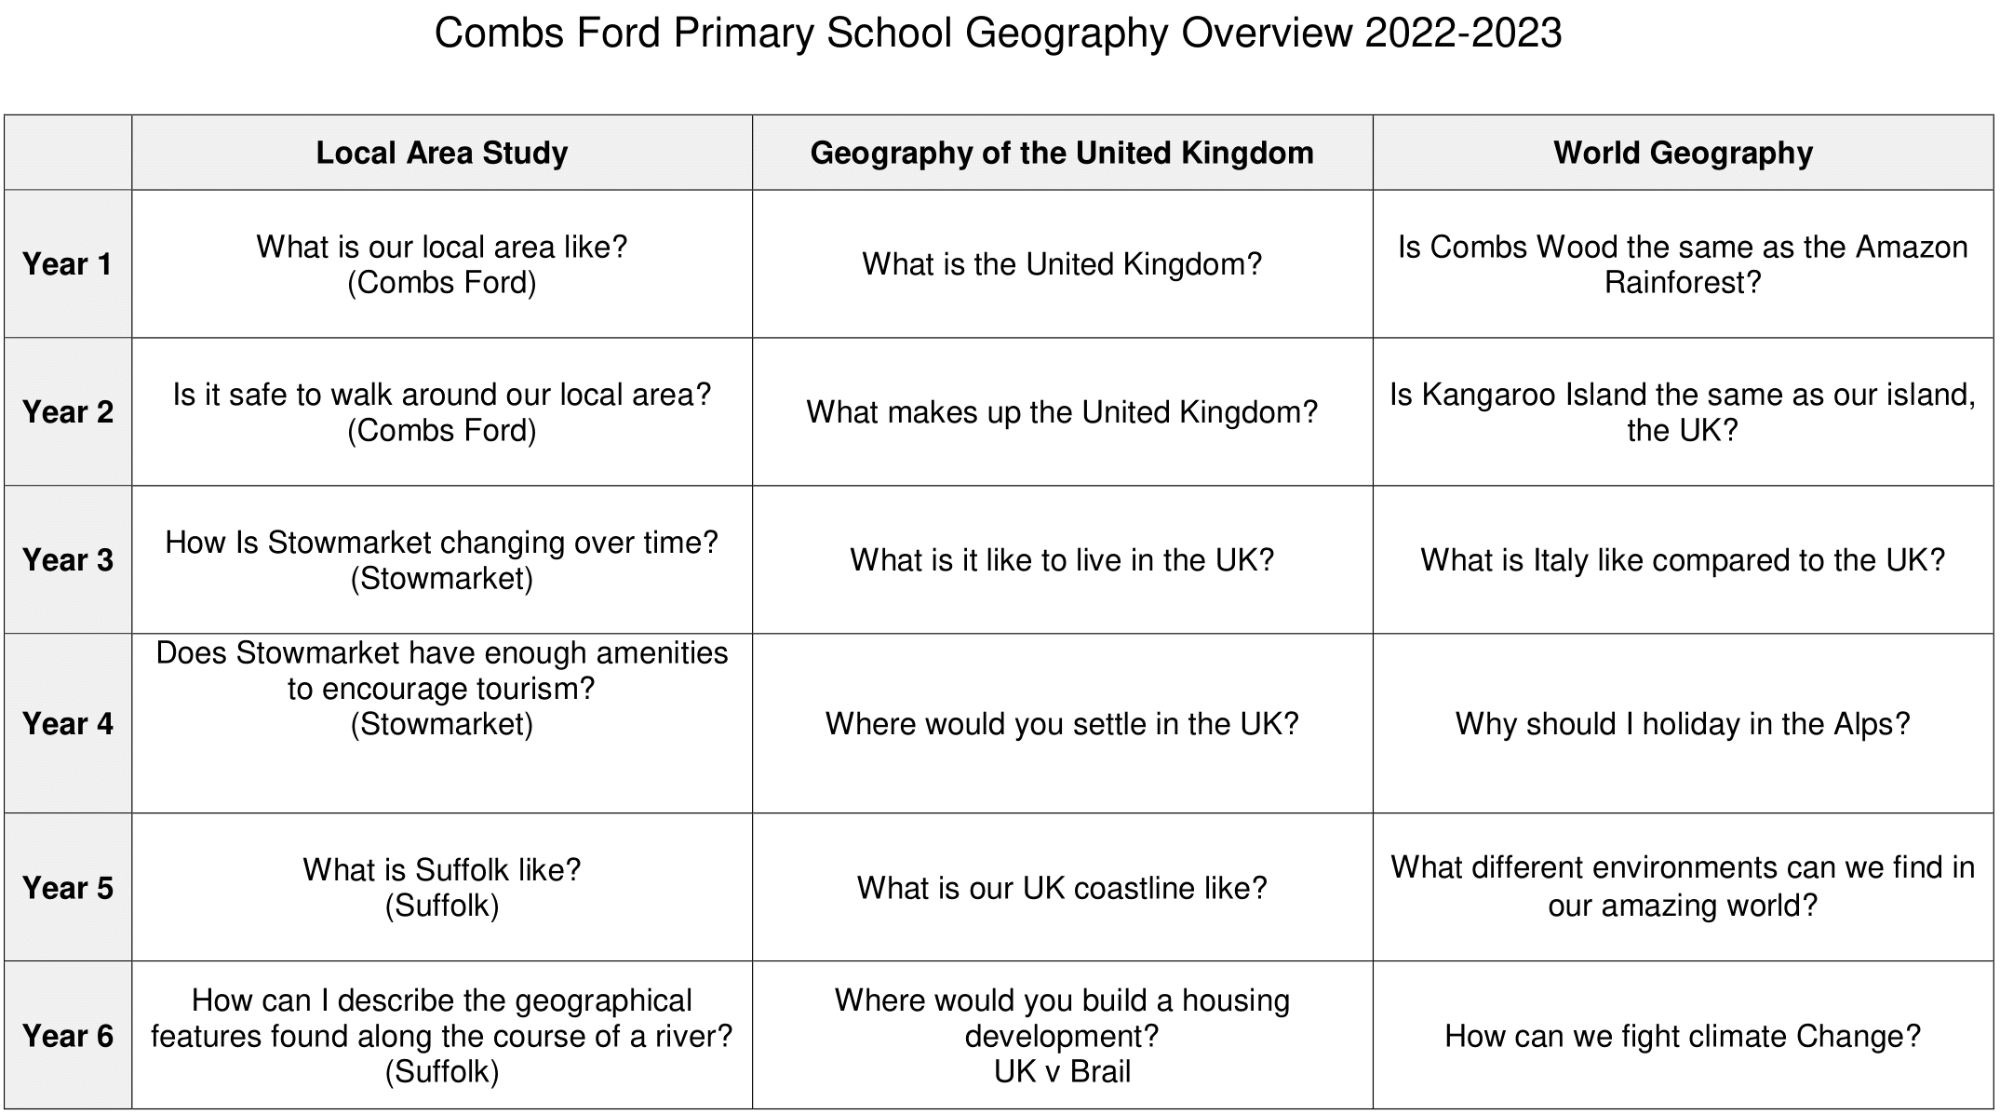 Image of the overview of Combs Ford Primary School's Geography Curriculum.